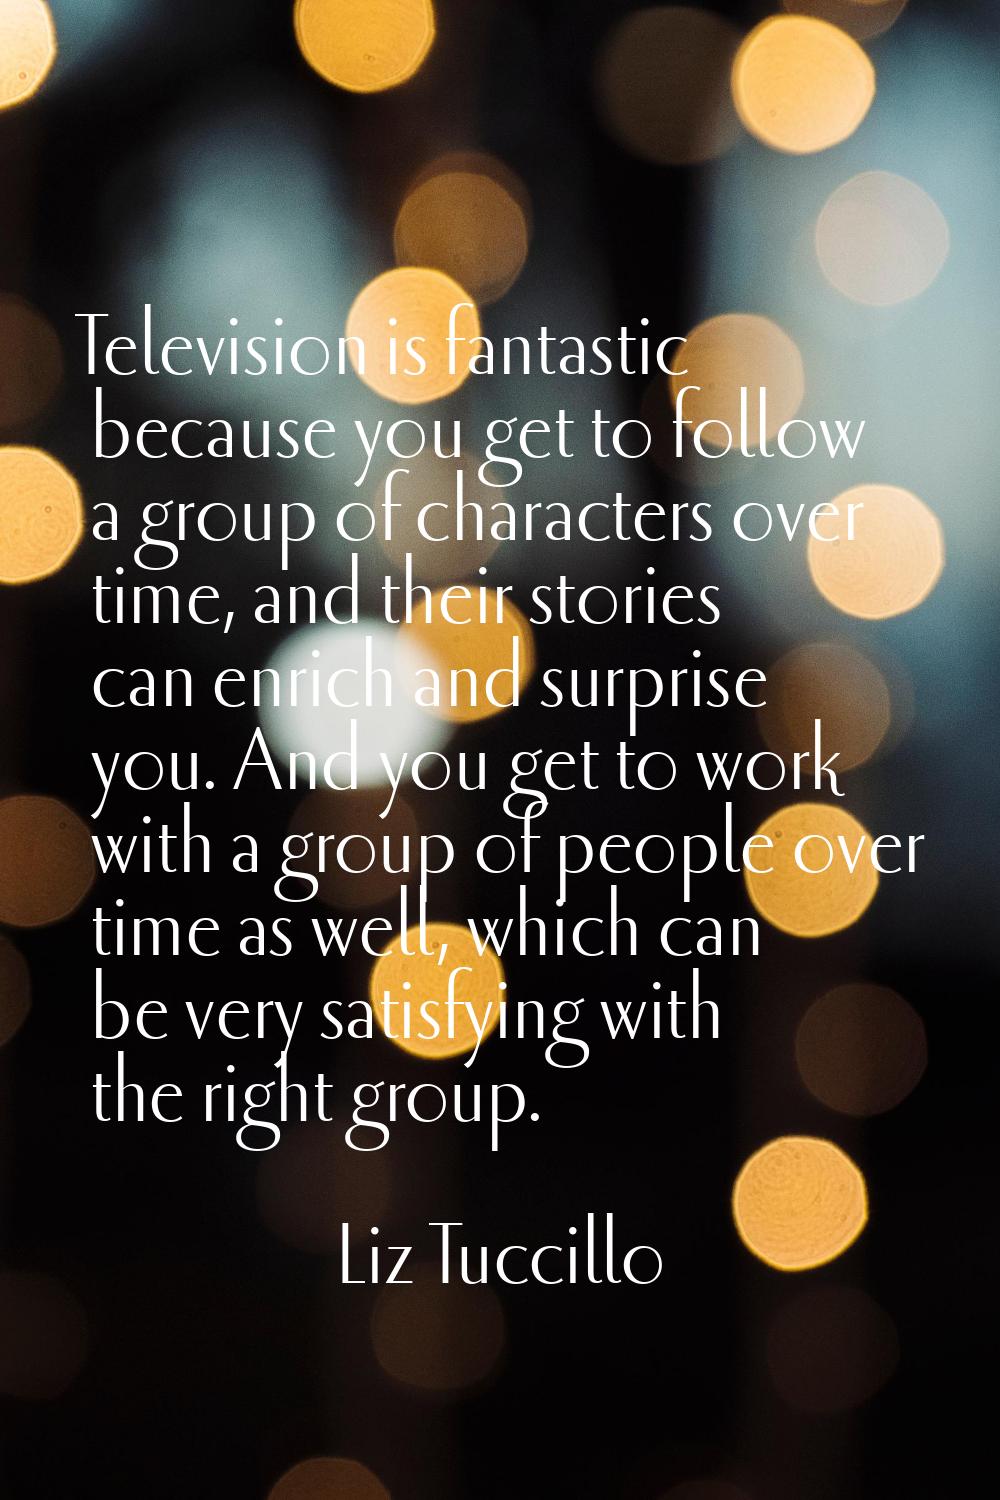 Television is fantastic because you get to follow a group of characters over time, and their storie